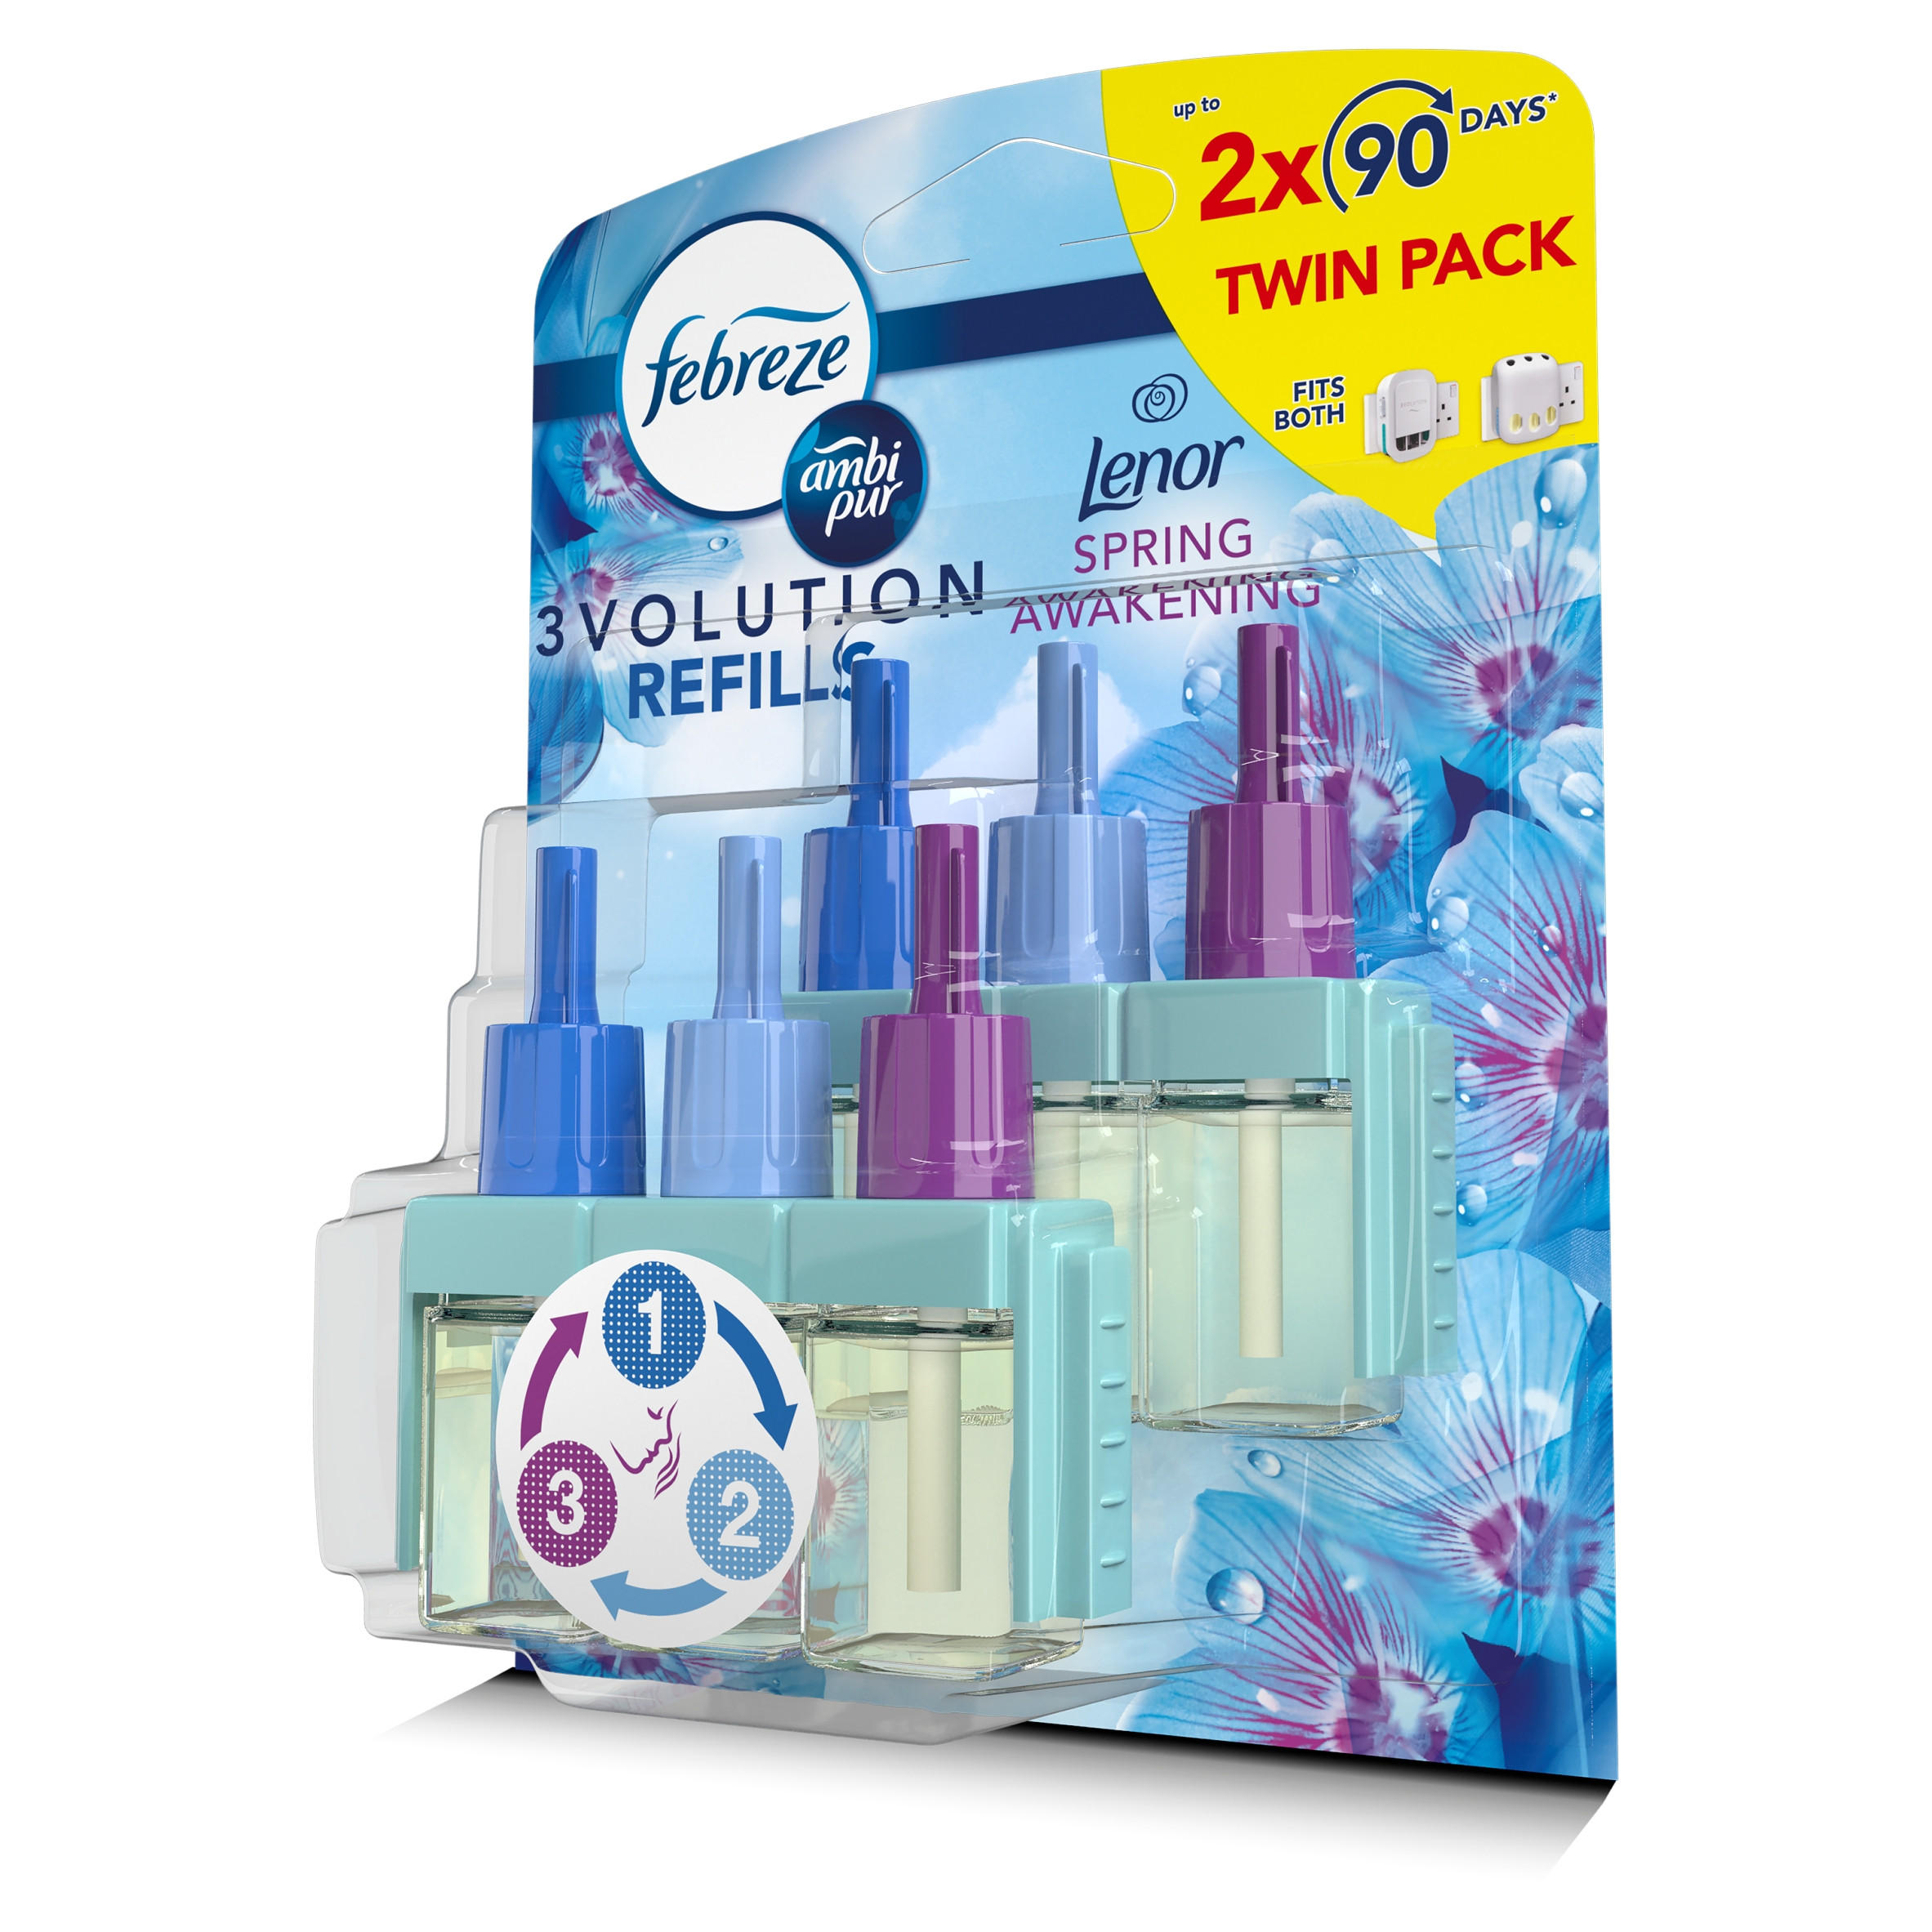 Febreze Ambi Pur 3Volution Plug in Refill Air Freshener 2X90 days pack of 1  & 2